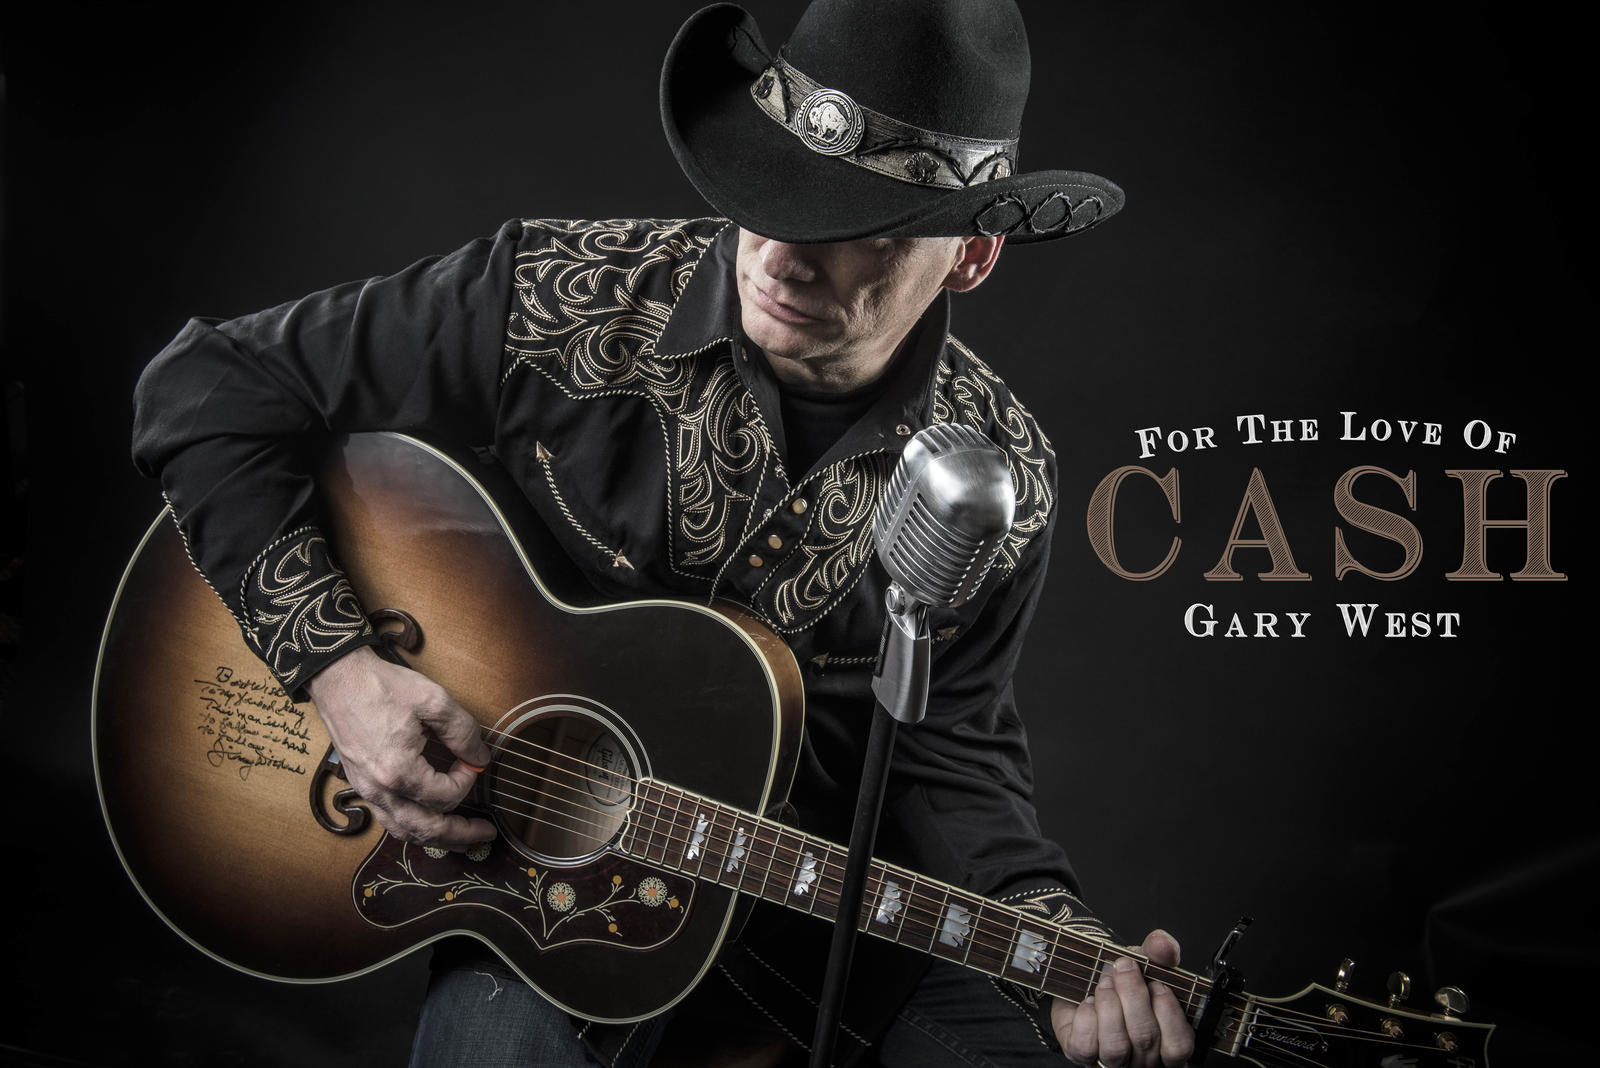 Legendary Nashville Musician, steps into the spot light with an exciting tribute to Johnny Cash.